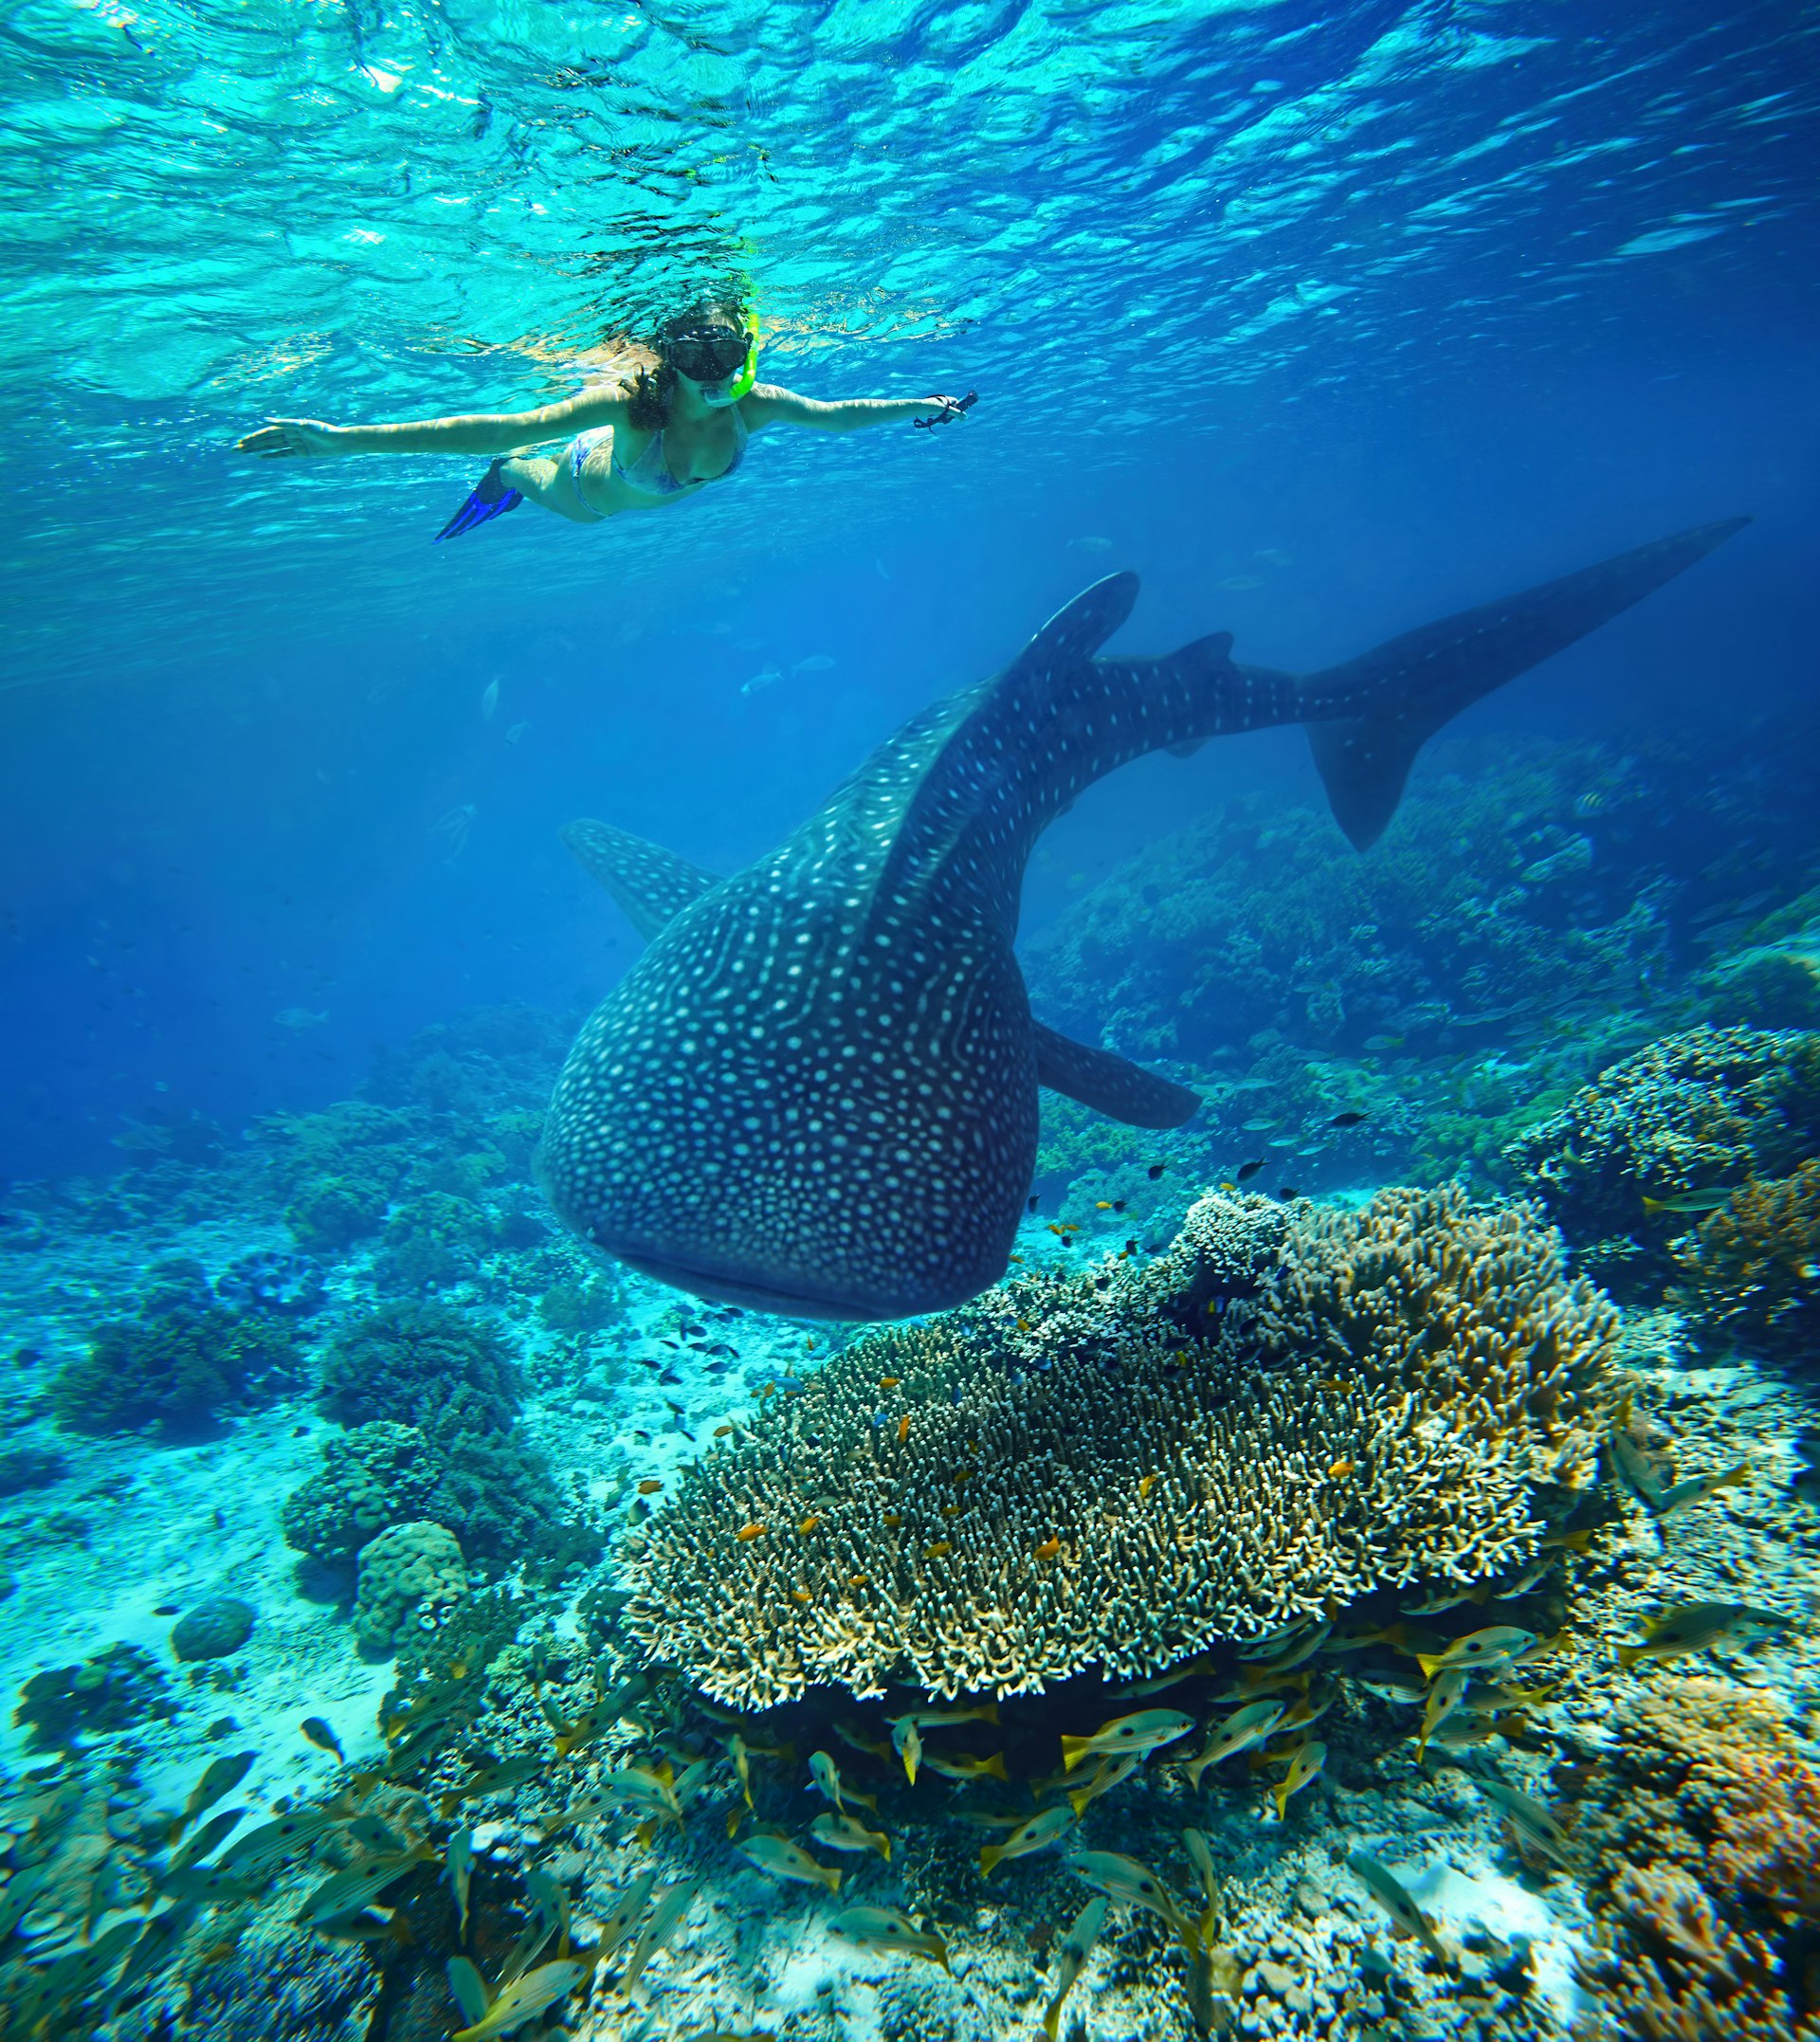 An underwater shot of a woman snorkelling in crystal clear waters, beneath her is a large whale shark, which swims above a seabed covered in coral.